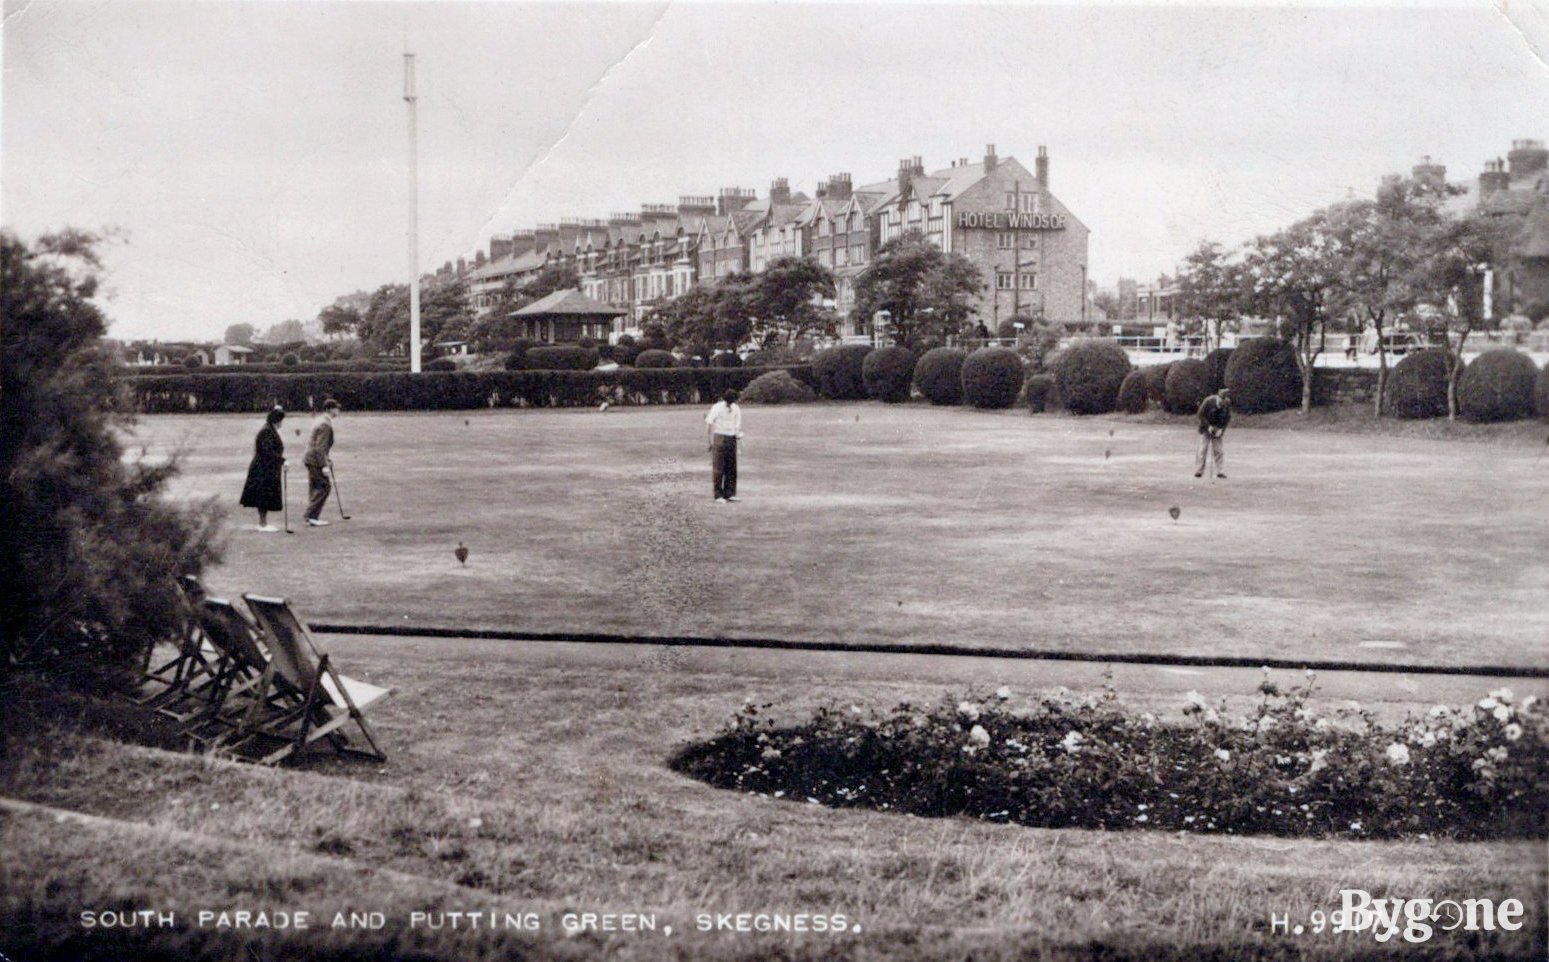 South Parade and Putting Green, Skegness